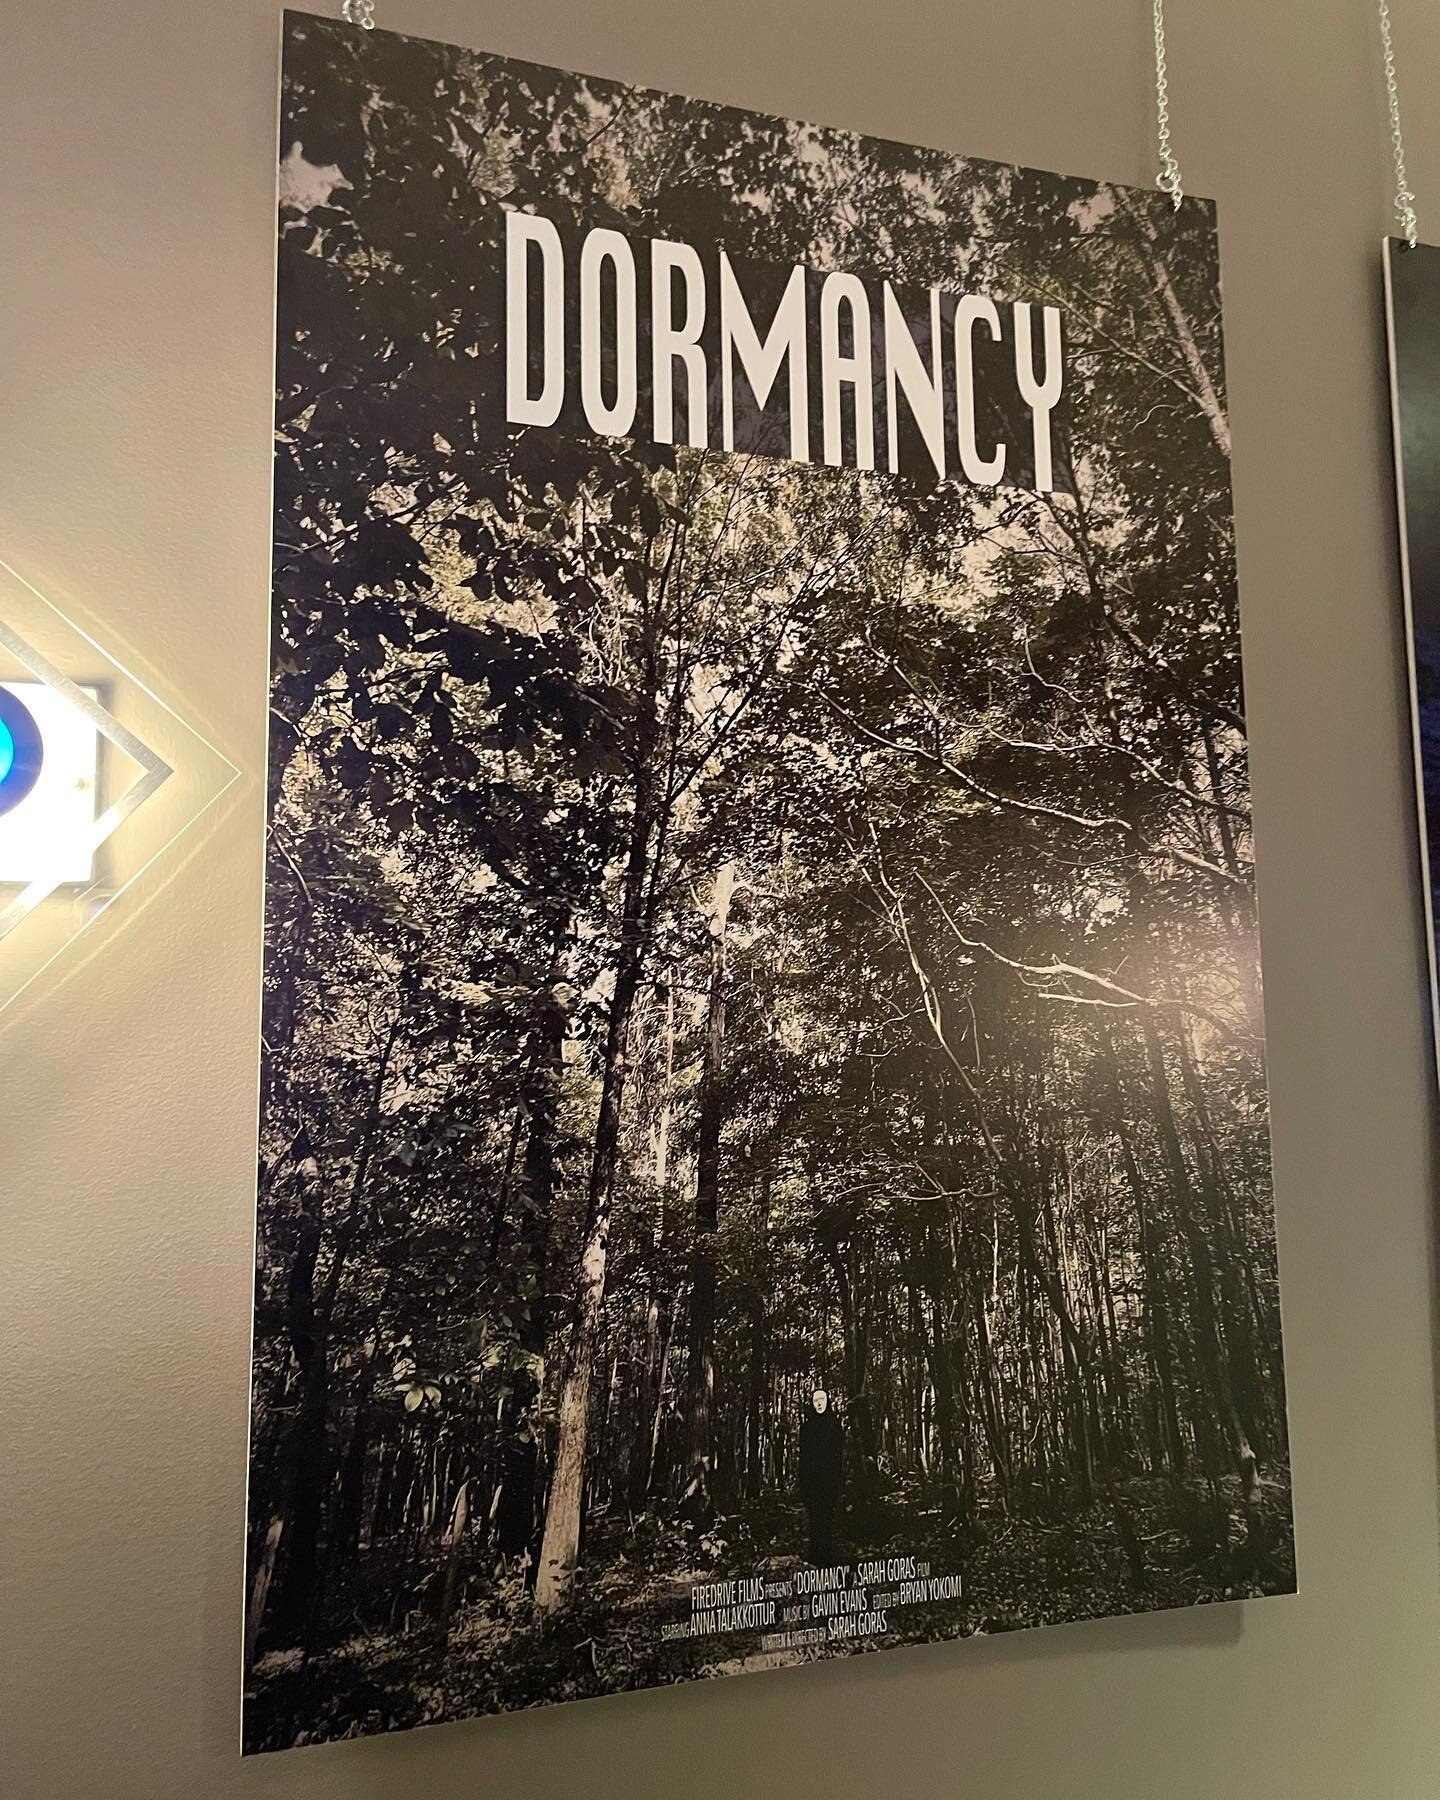 It&rsquo;s a great day for a film festival.  My horror experimental short, Dormancy is showing tonight at 6pm for the @orlandofilmfest at the exciting downtown Orlando CMX theater.
Special shout out to the cast and crew @annatalakkottur @yoko474747 @